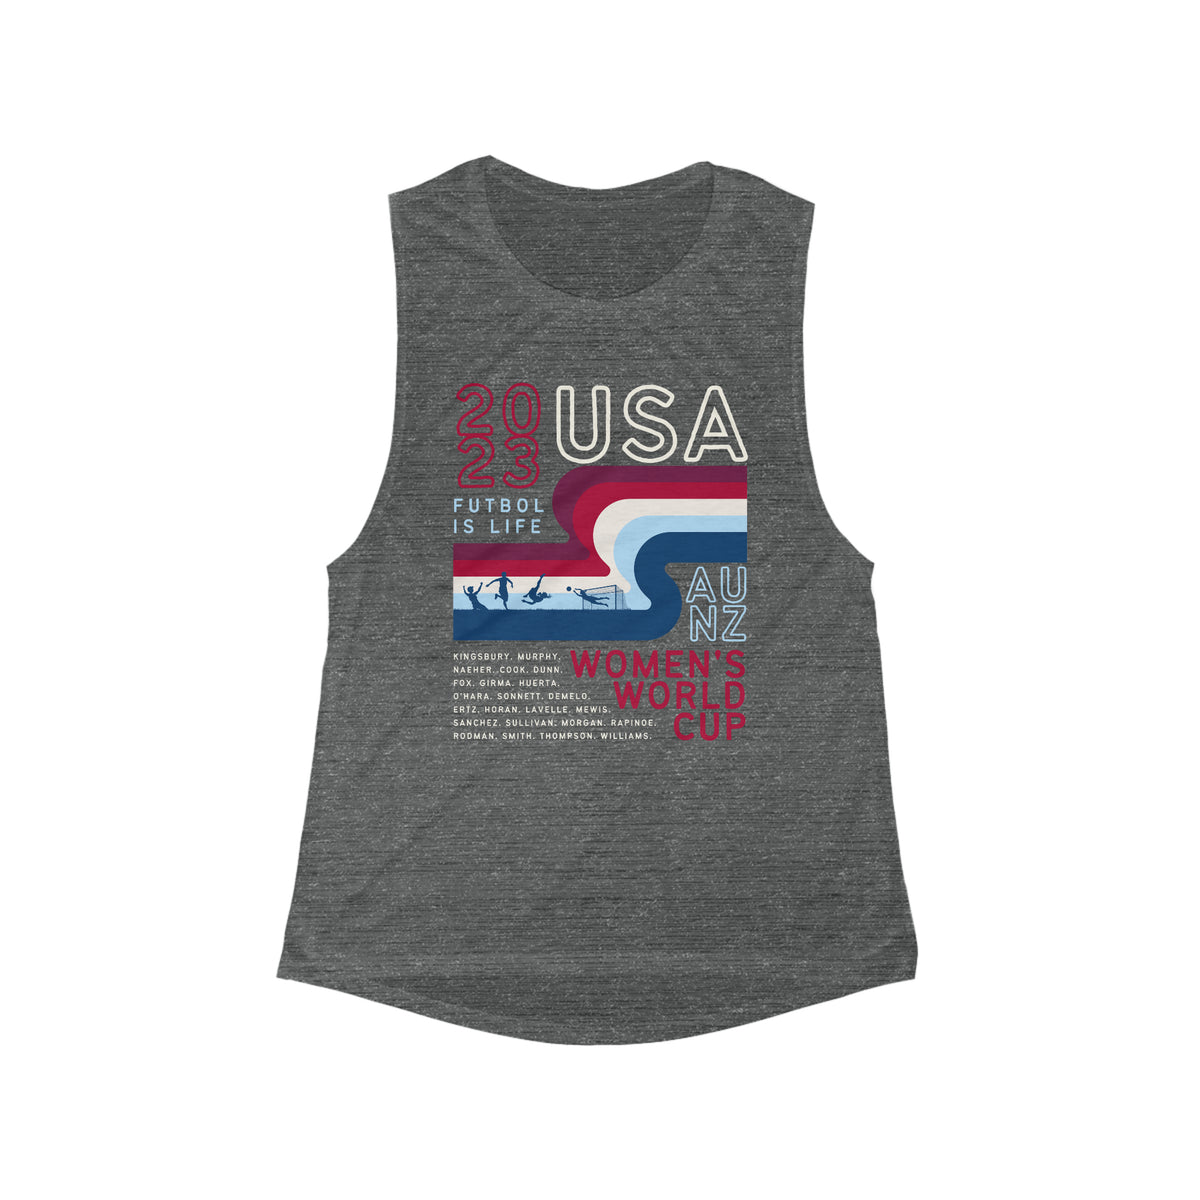 USA World Cup Roster Women's Tank Top